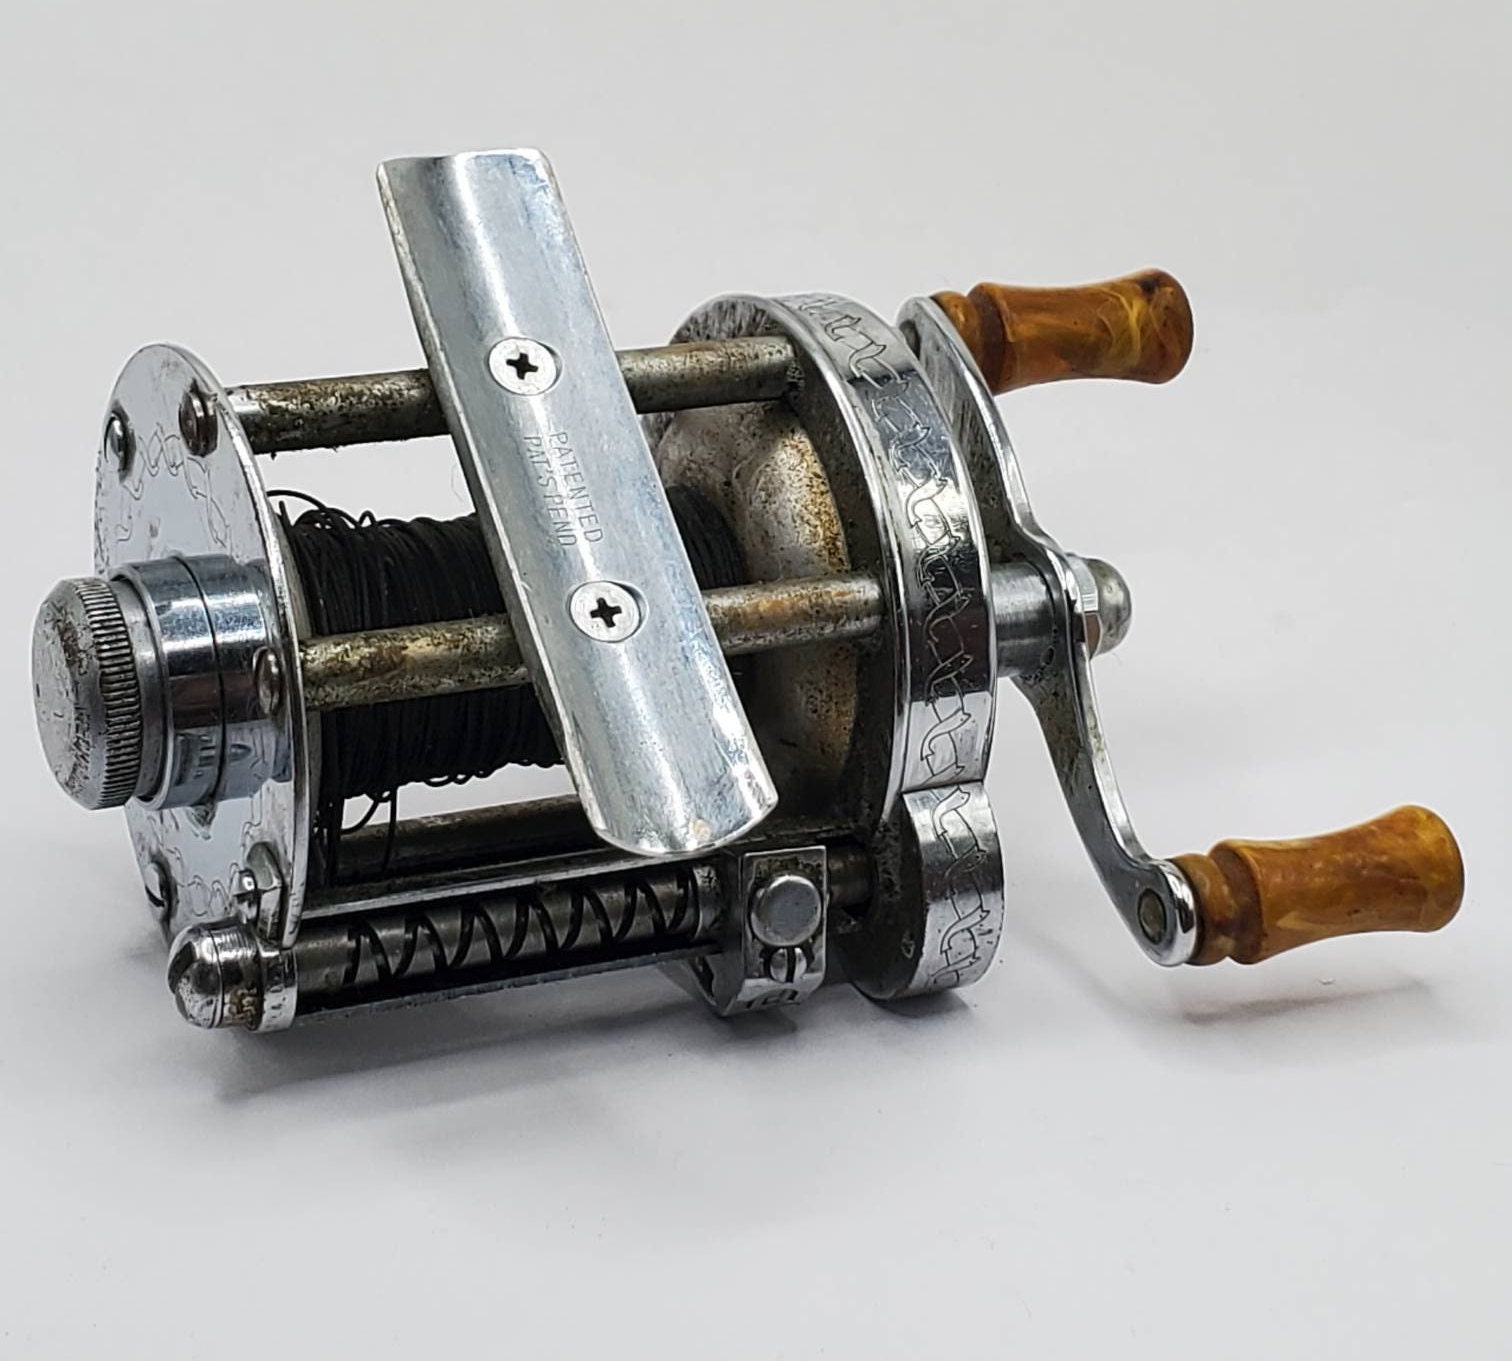 VINTAGE PFLUEGER SKILKAST Akron No. 1953 Chrome Fishing Reel Casting Reel U  S A Collectible Fishing Sporting Goods -  Canada